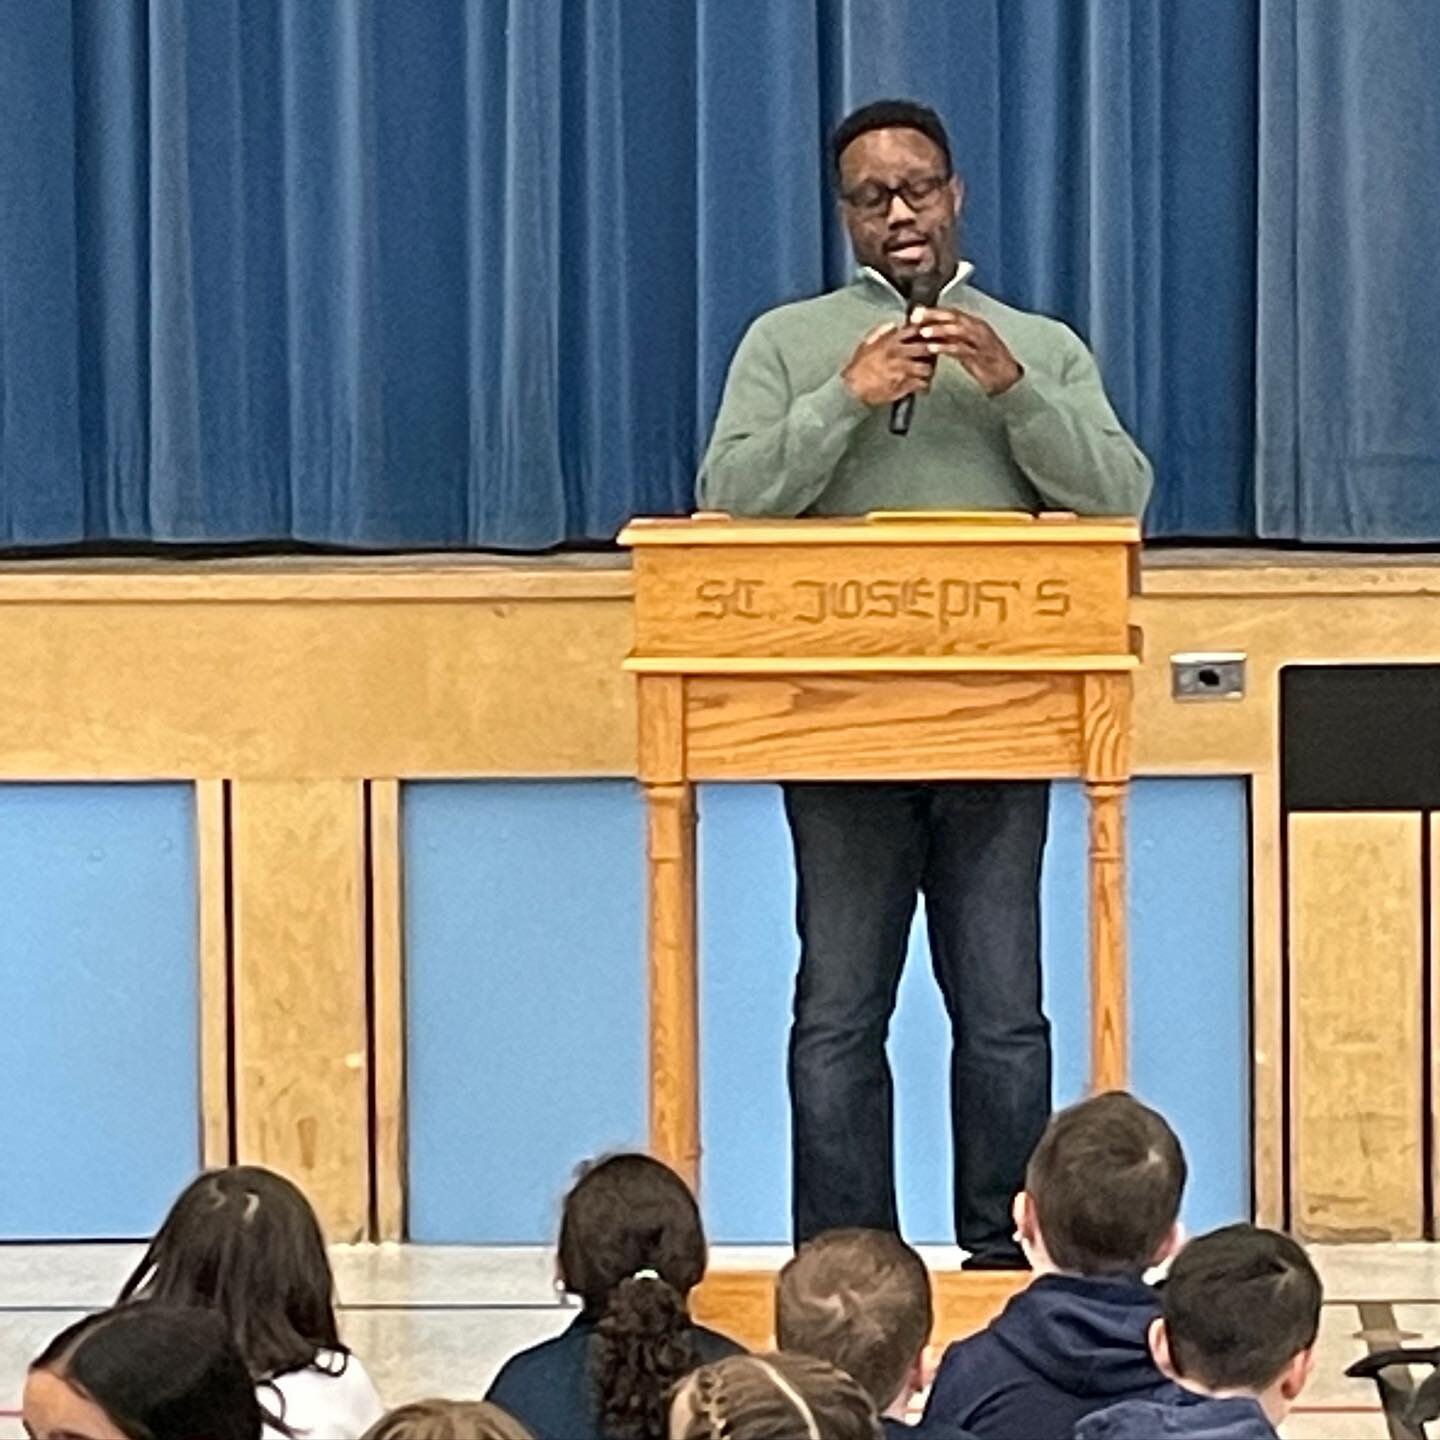 Conversing with students about the power of words and how they can be (mis)used is one of the most important ways that I share my voice. It&rsquo;s an honour and privilege I don&rsquo;t take lightly. At St. Joseph&rsquo;s CS in @torontocatholicdsb ye